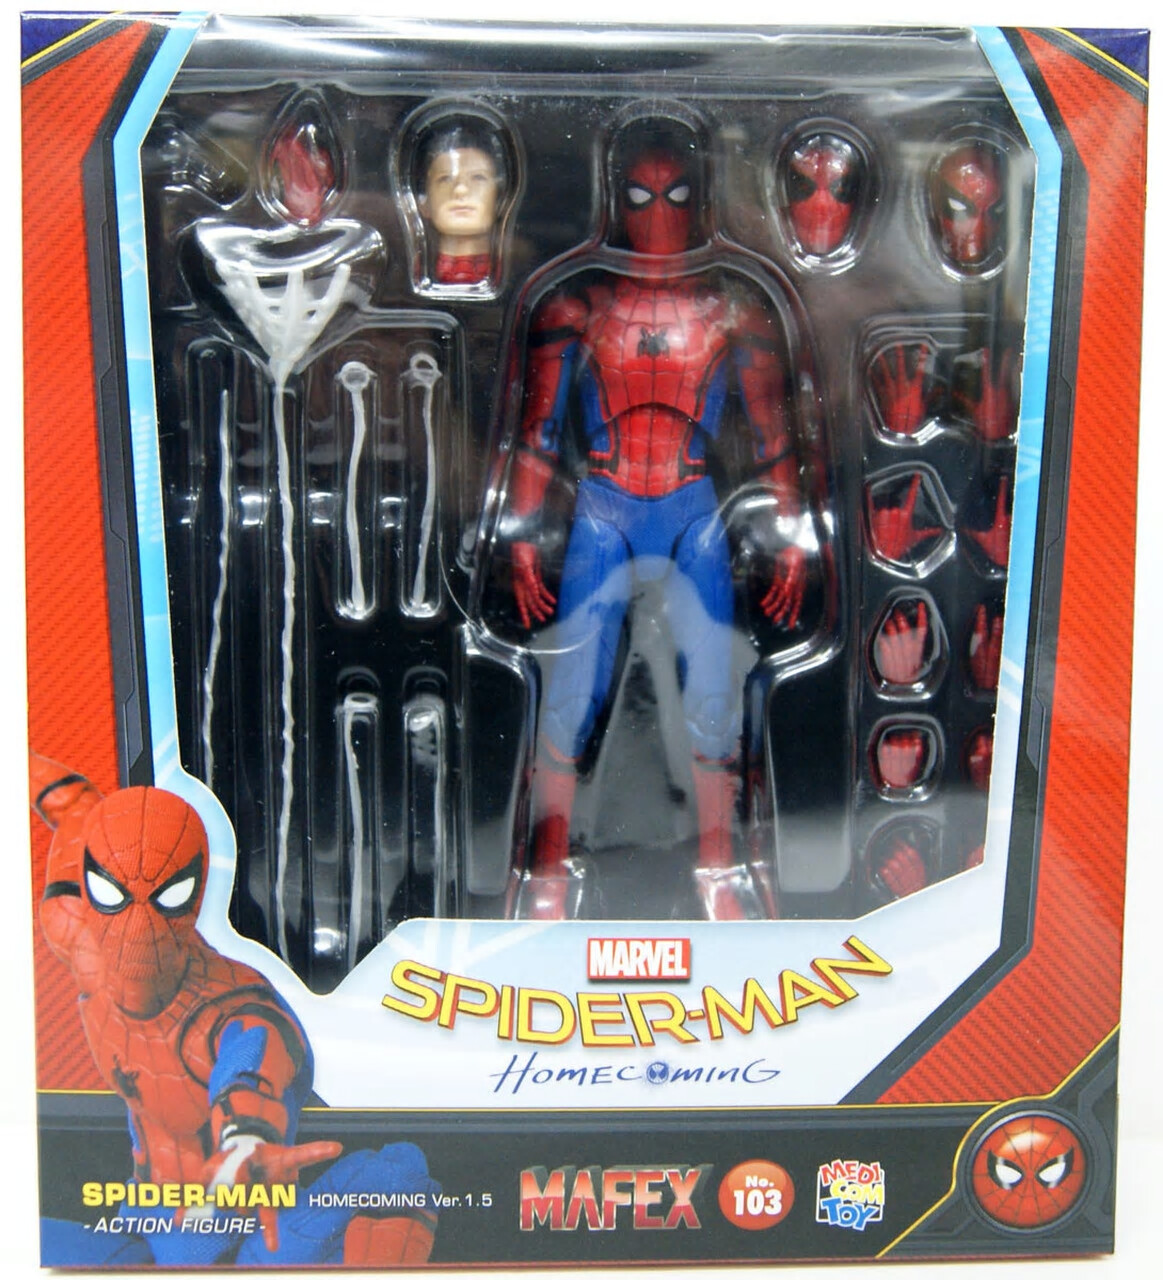 6" Spider-Man Homecoming Action Figure Mafex Medicom Toy Gift Collection 